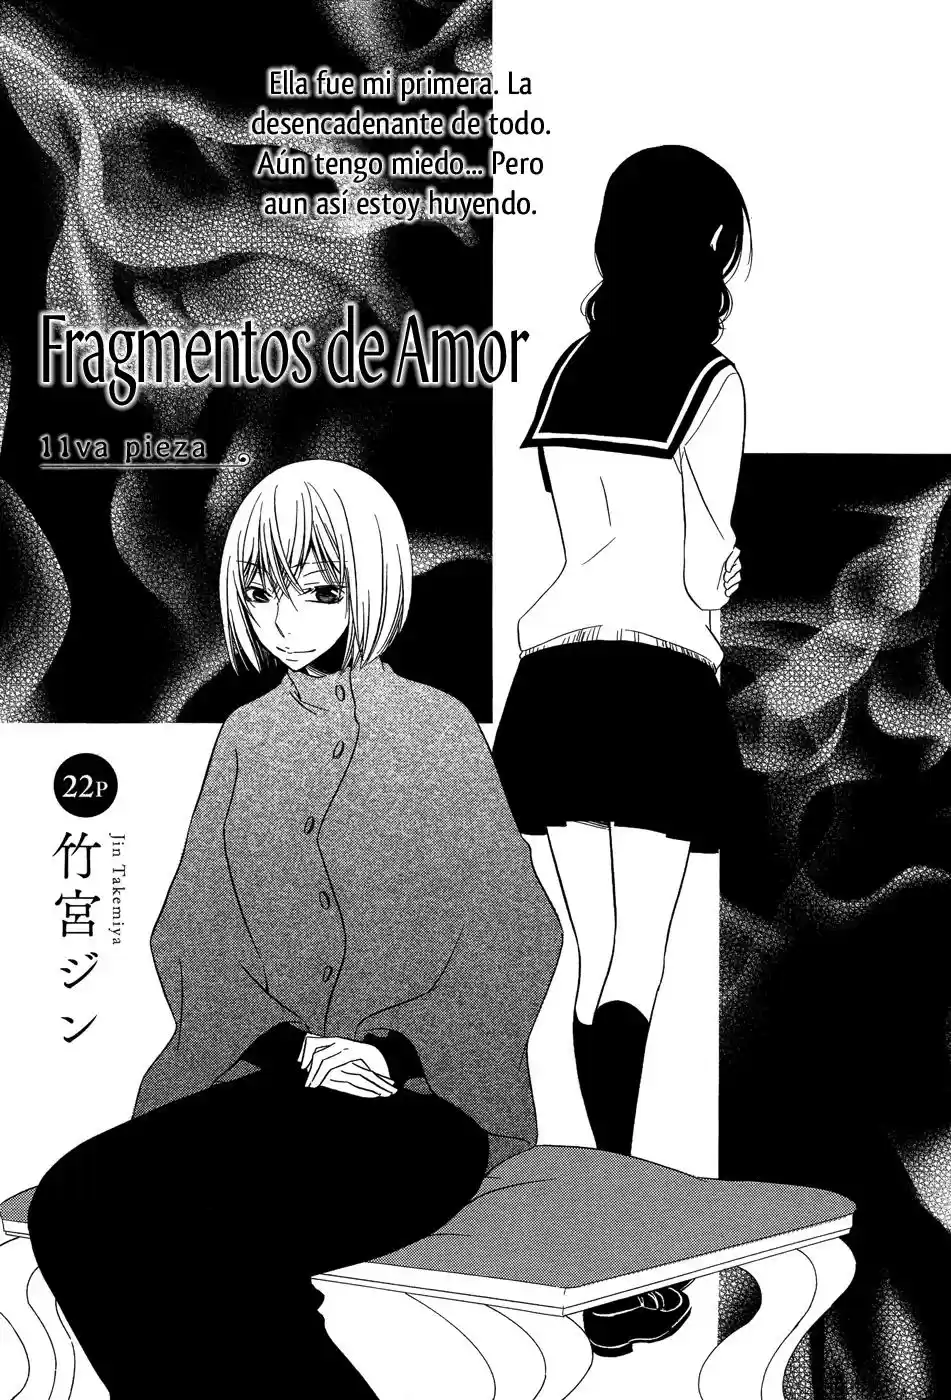 Fragmentos De Amor: Chapter 11 - Page 1